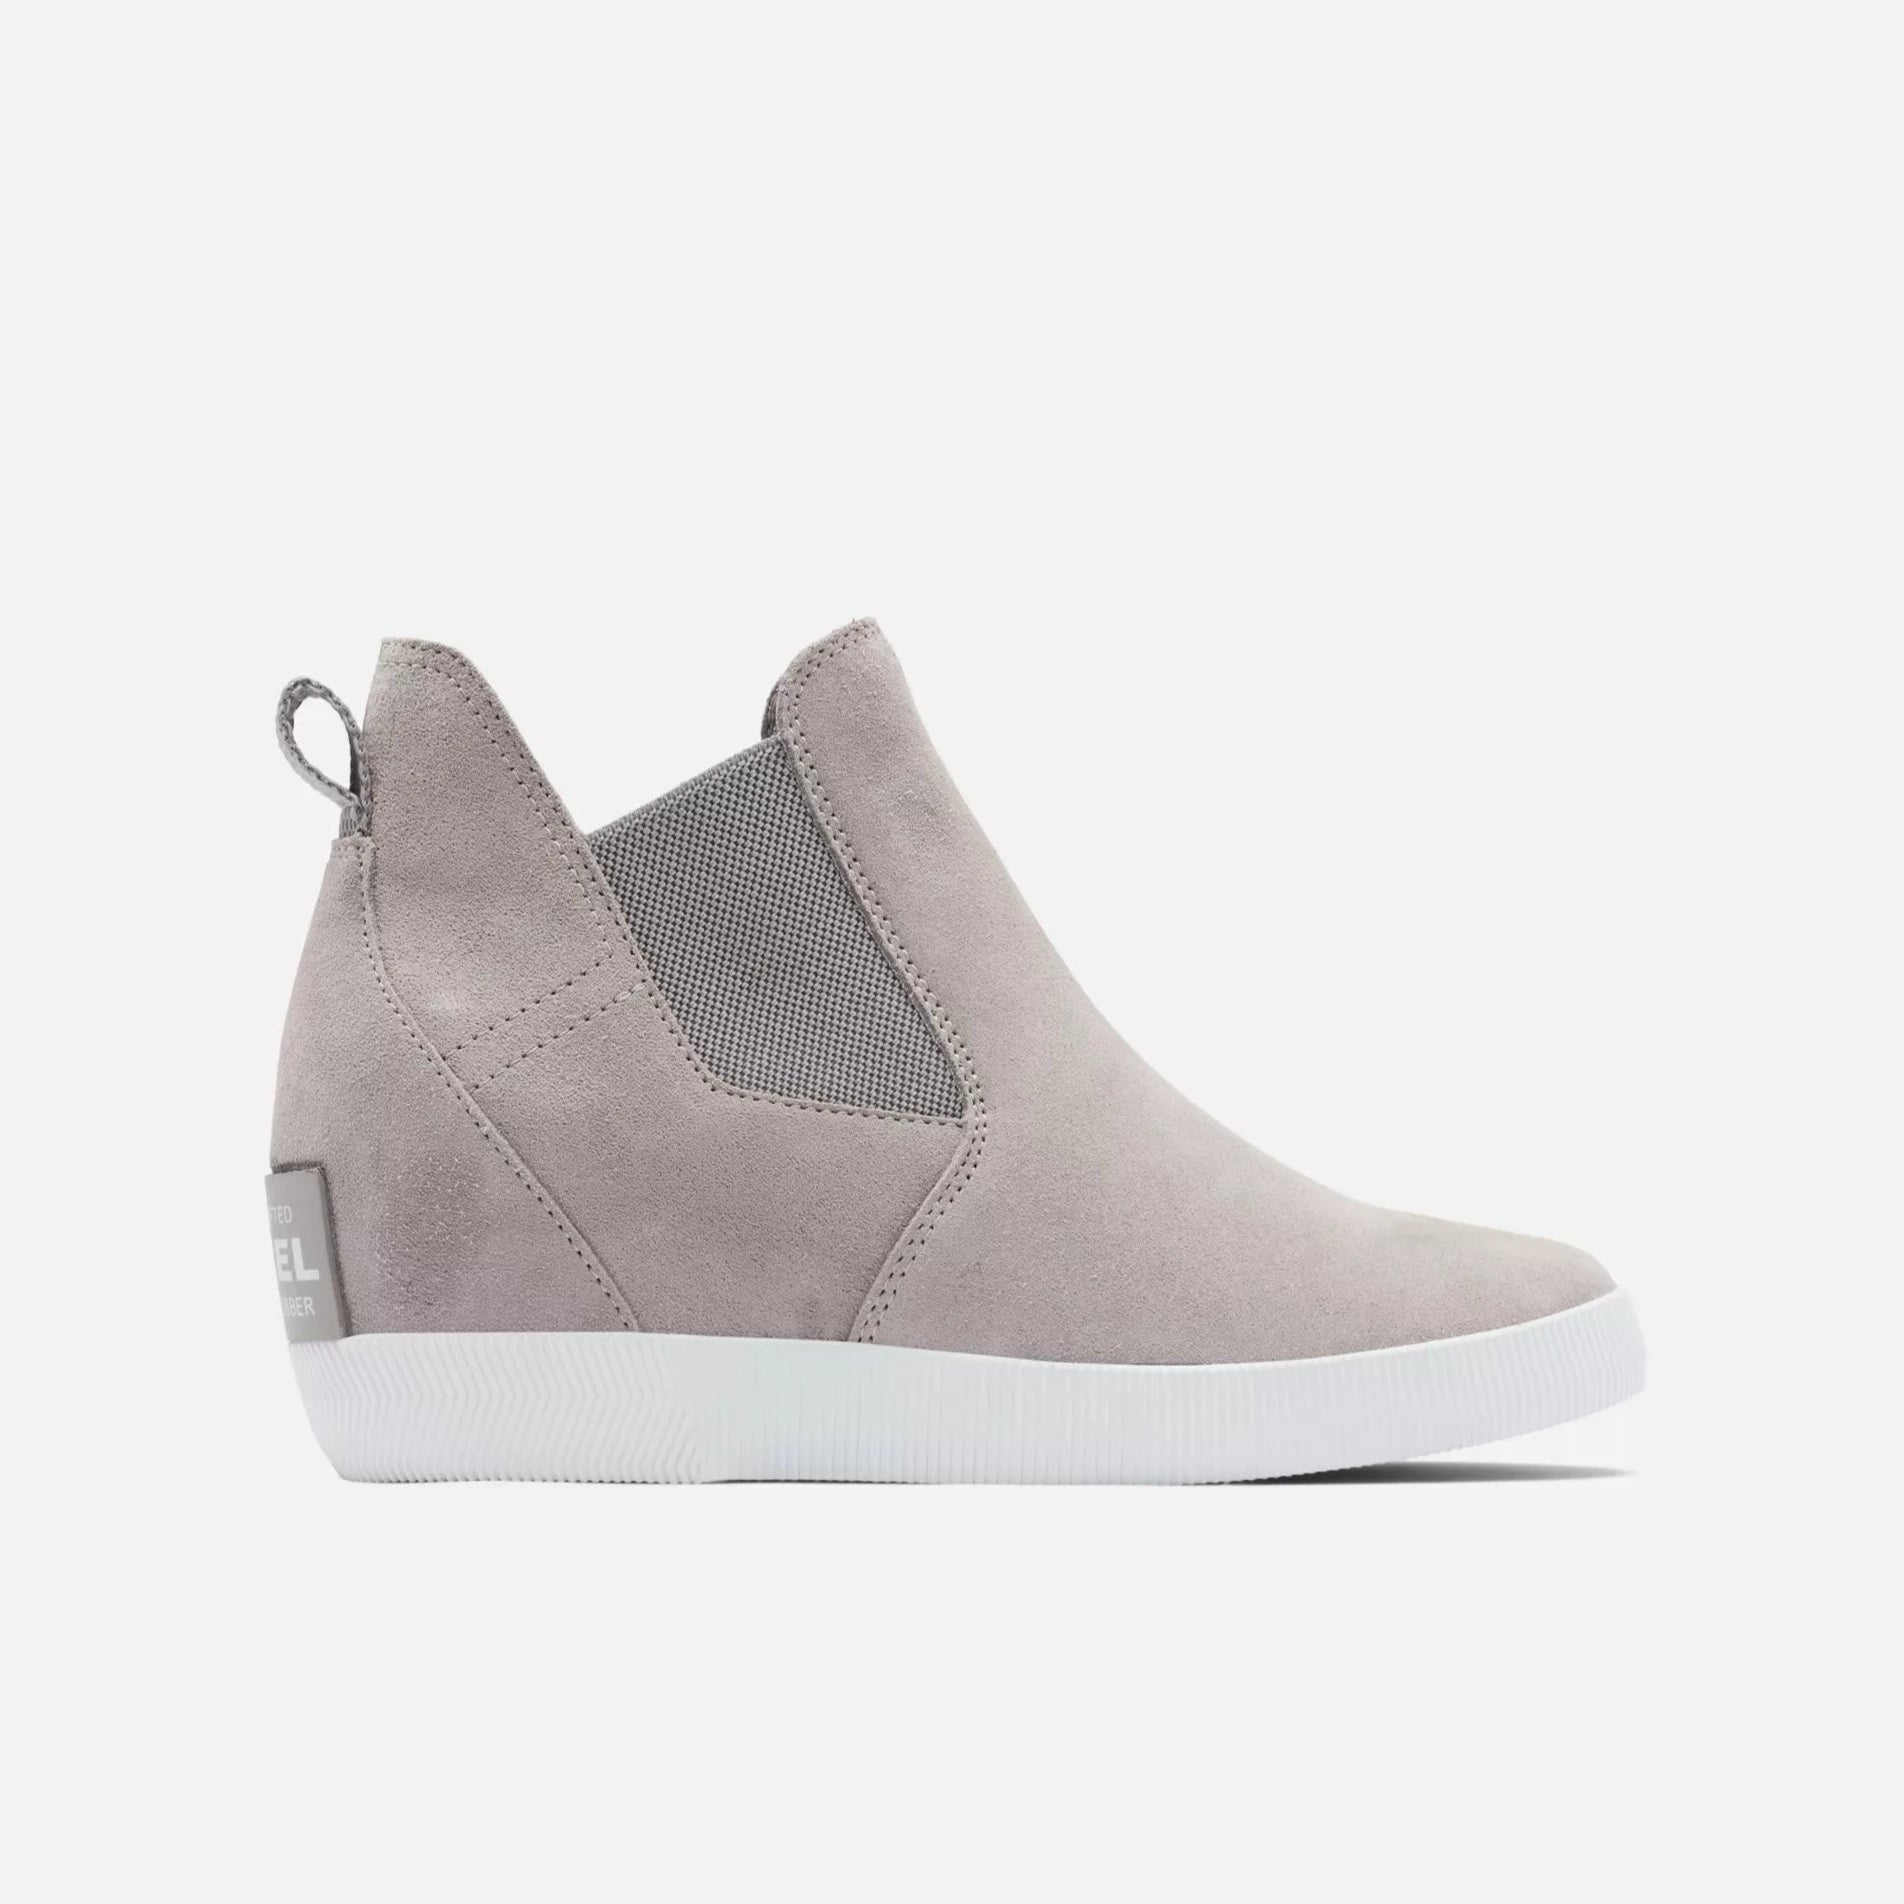 Sorel, Sorel Donna Out N About Slip-On Wedge Bootie - Grigio Cromo/Bianco